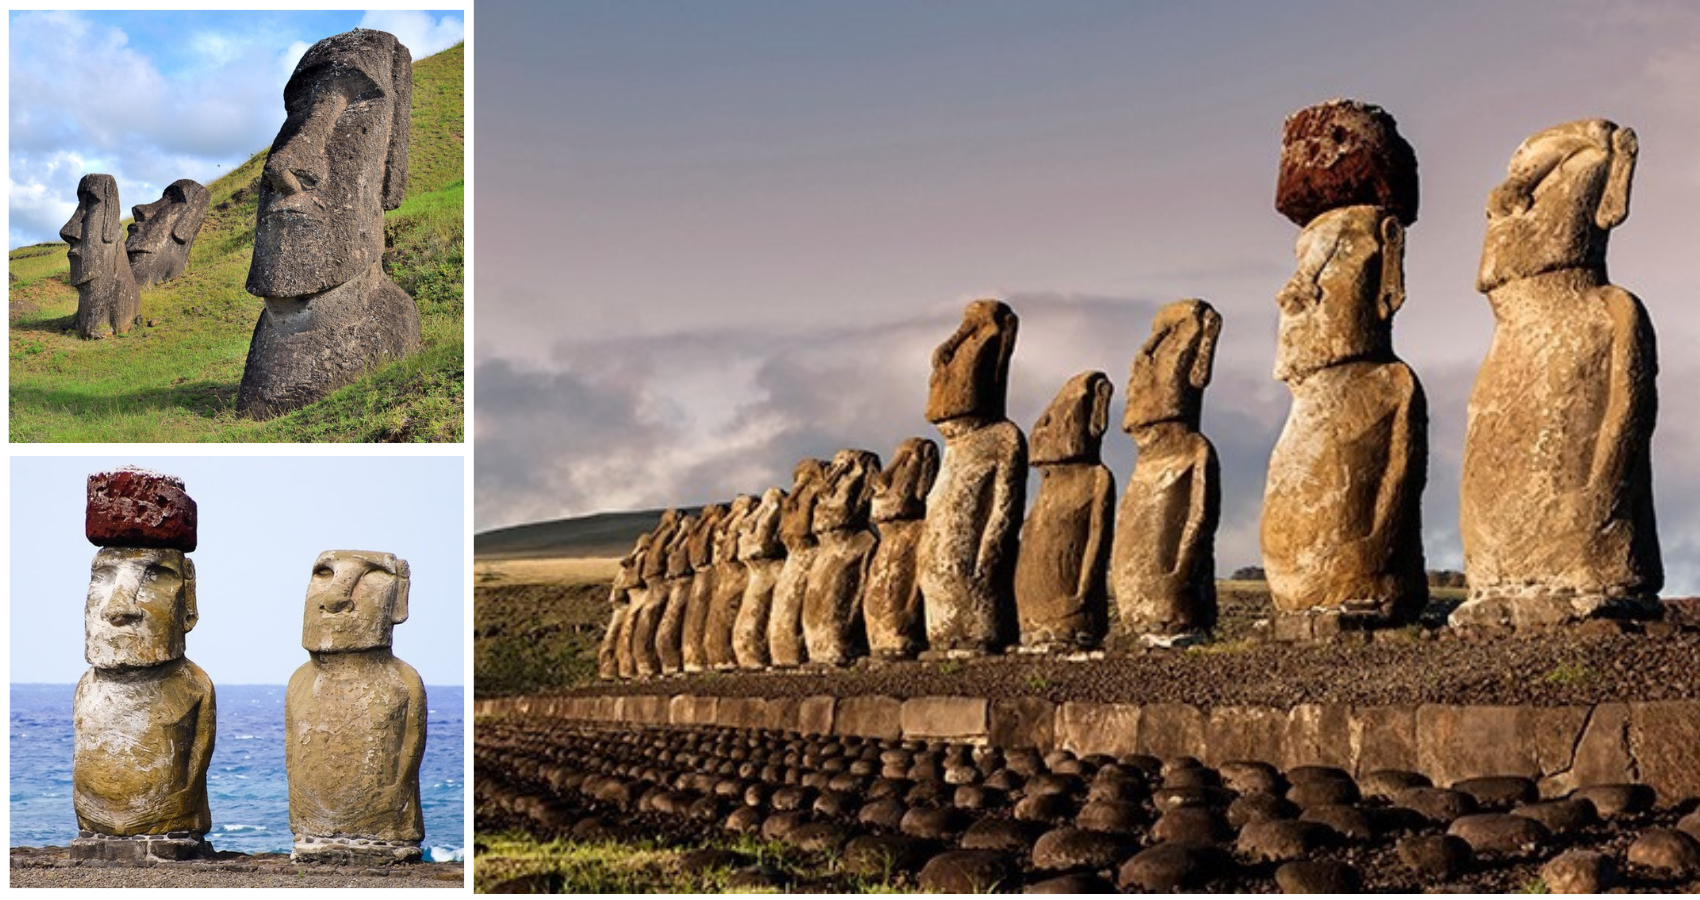 Archaeologists on Easter Island Have Discovered a Previously Unknown Moai Statue Buried in a Dried-Out Lake Bed